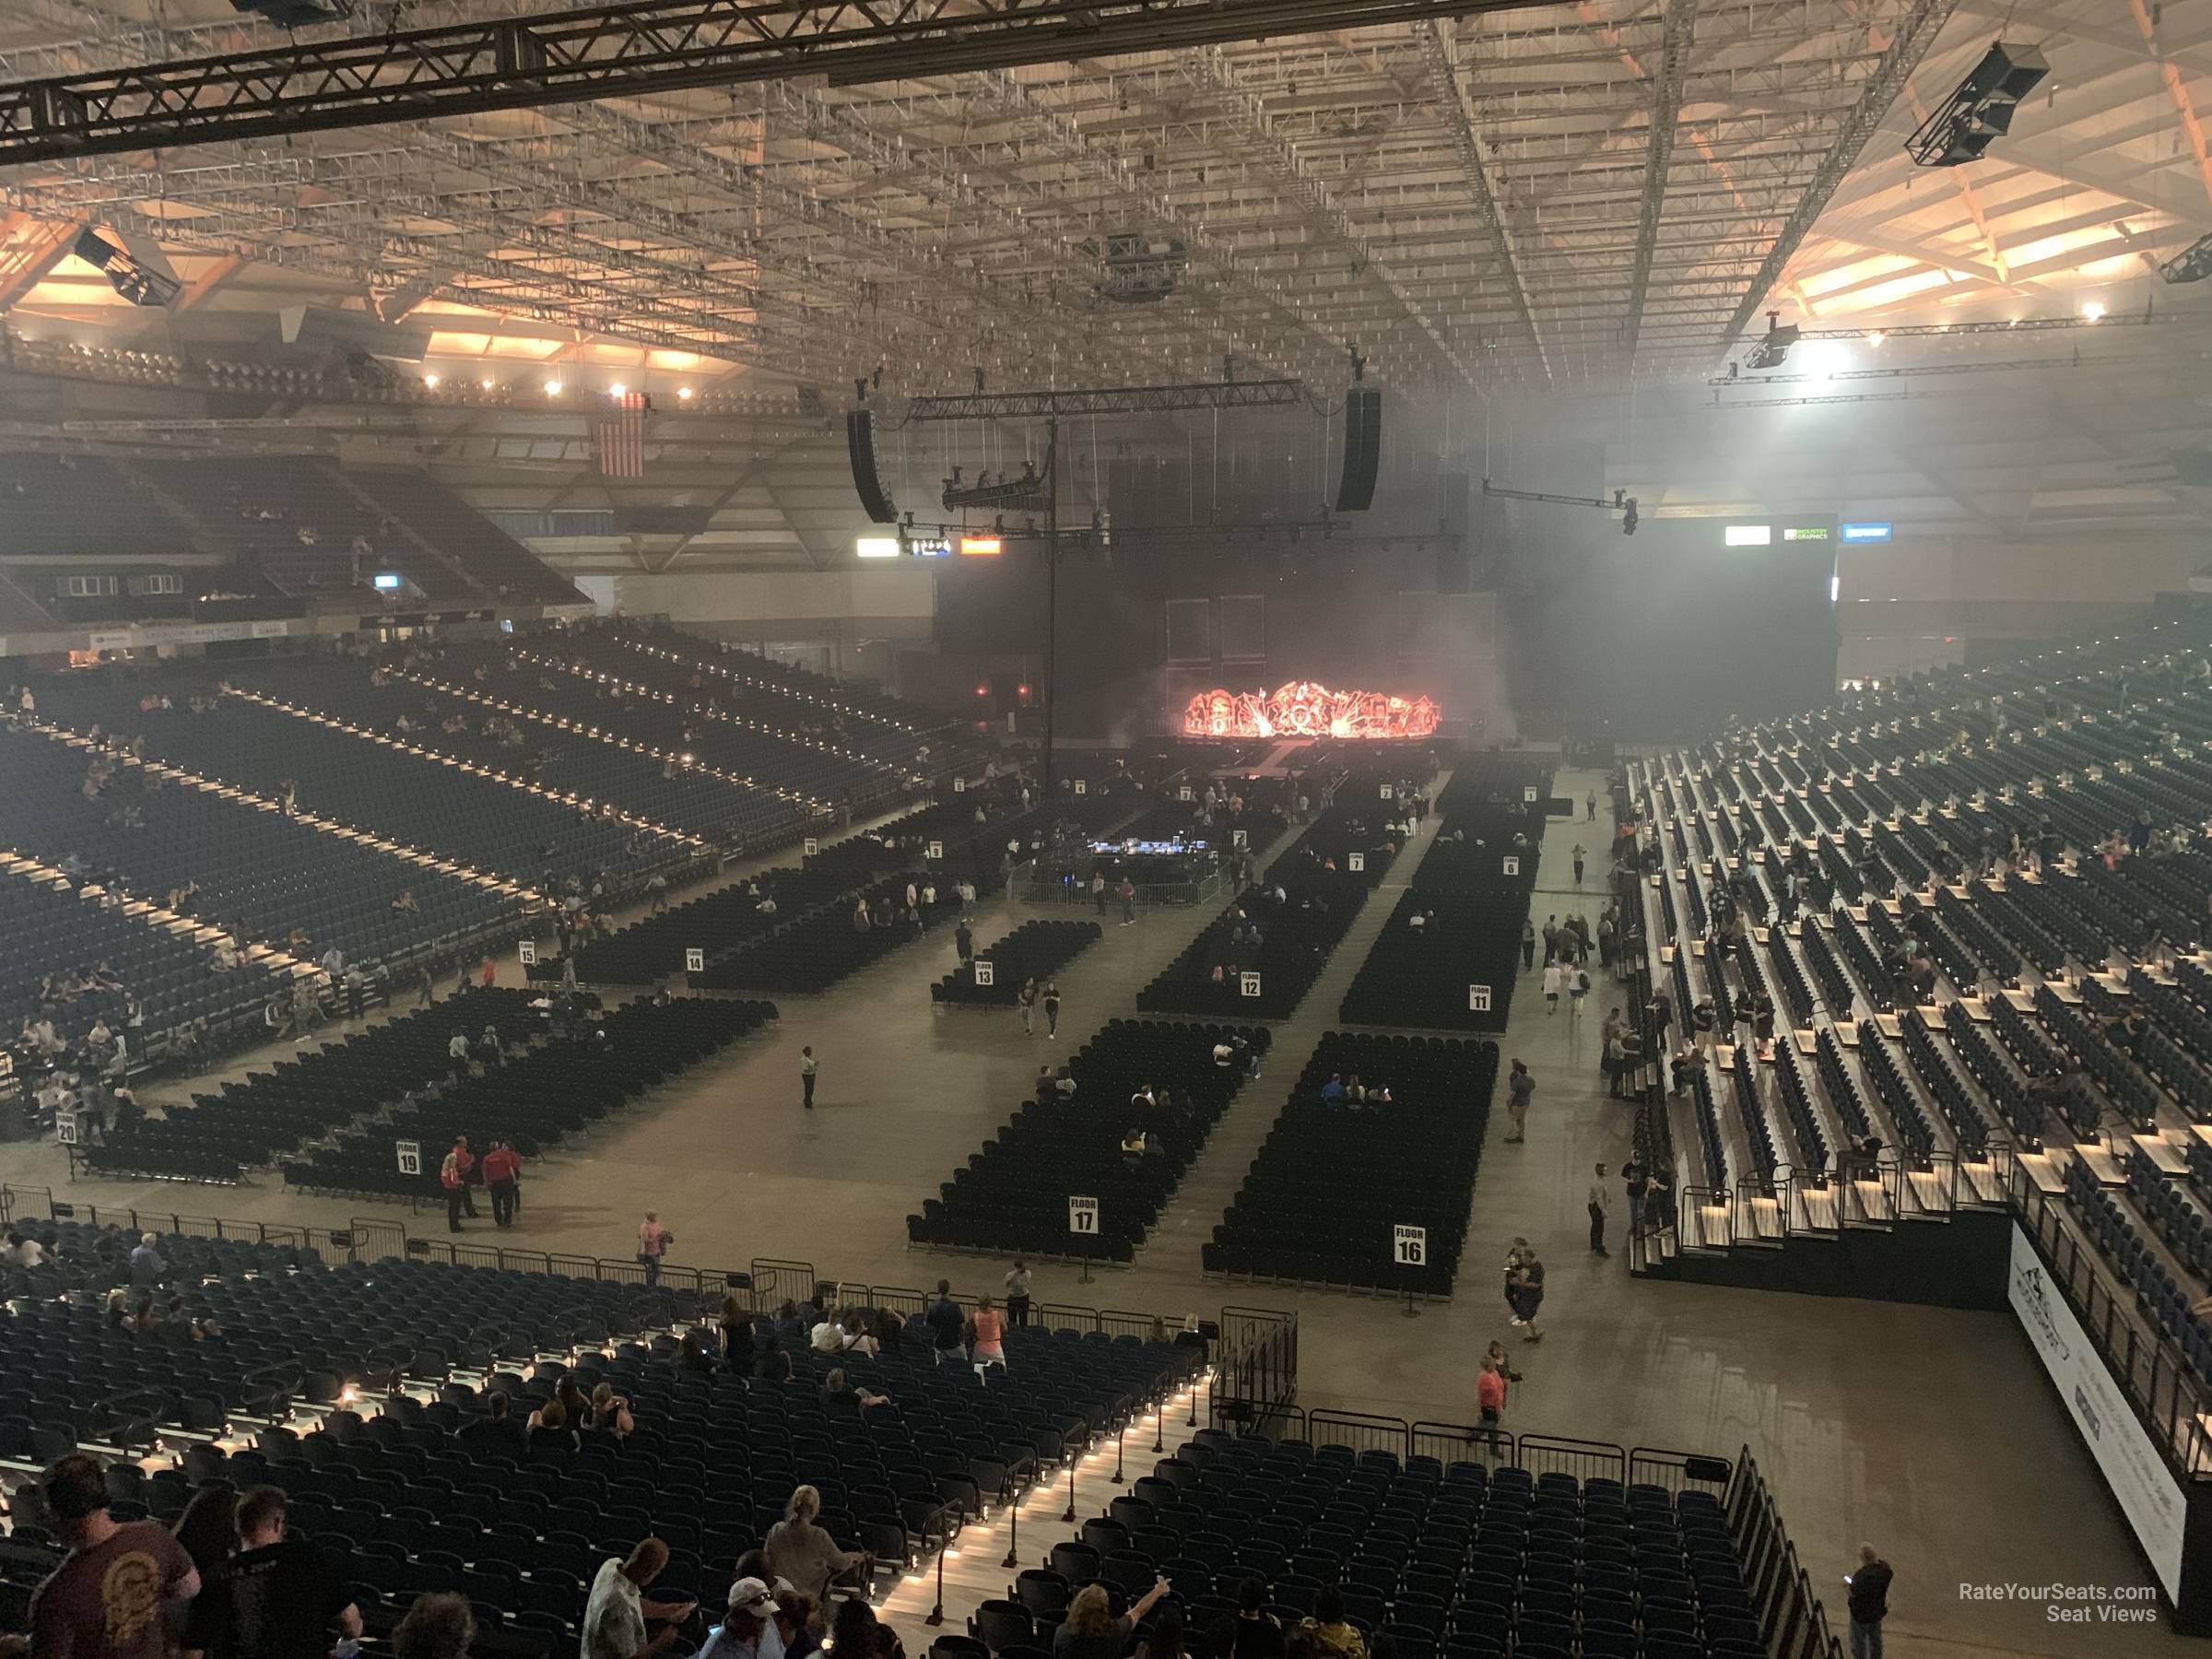 Tacoma Dome Section 213 - RateYourSeats.com